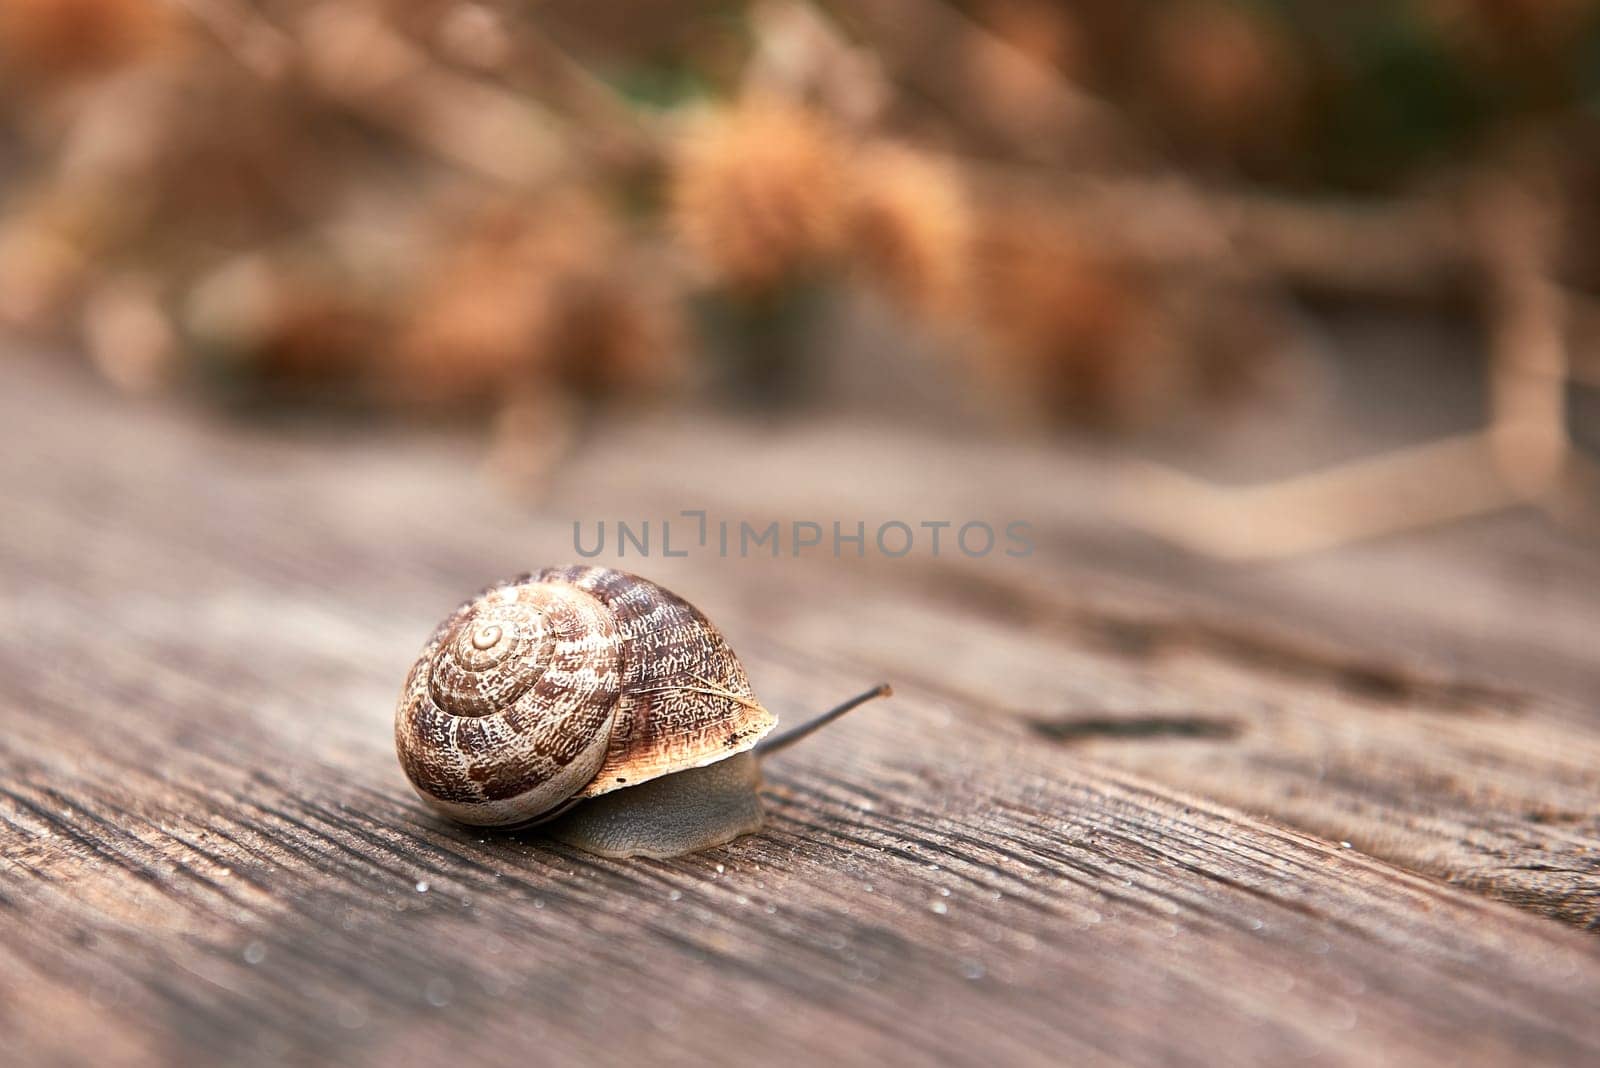 A snail on wooden board. out-of-focus background by raul_ruiz